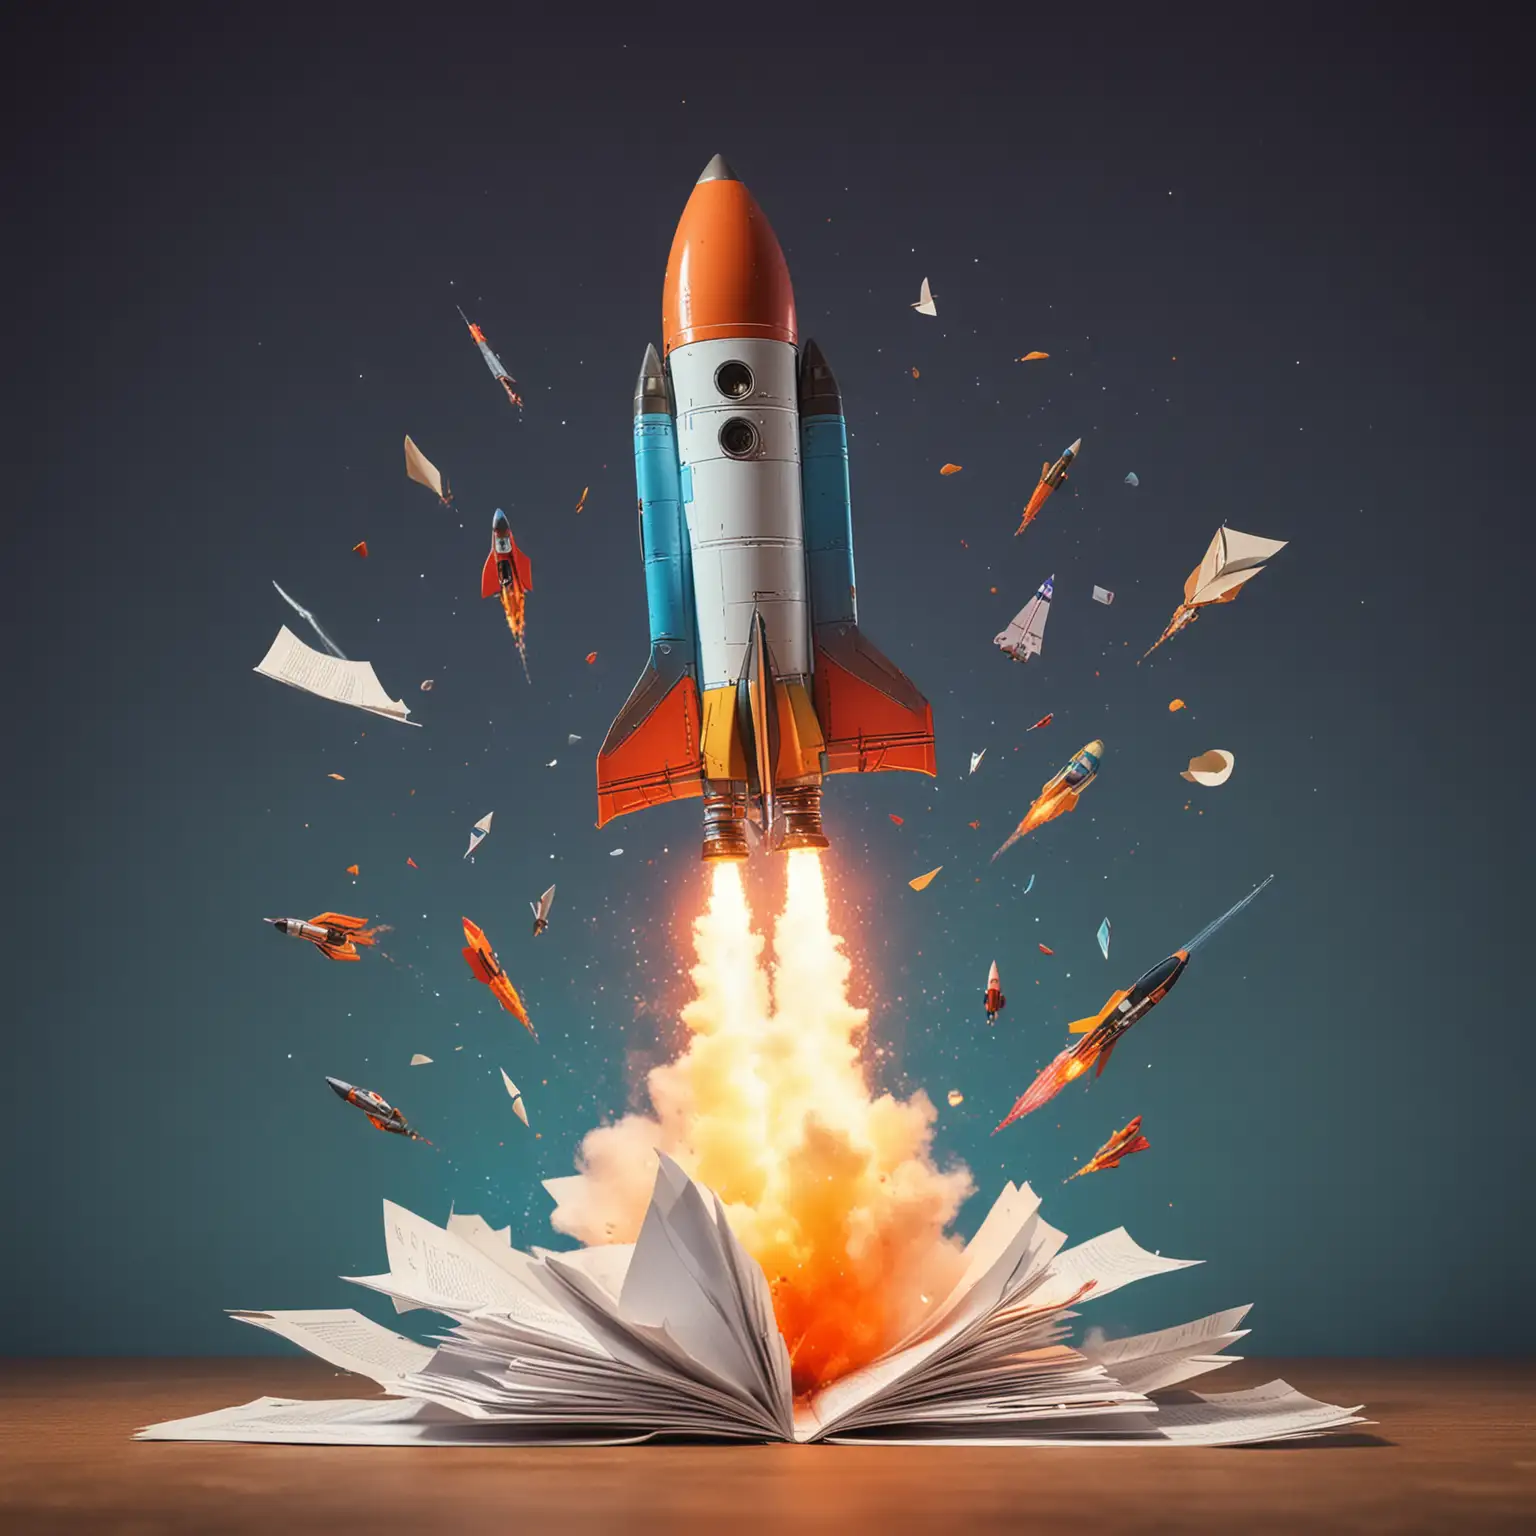 Rocket ship launching with documents flying out, vibrant colors, cartoon style, DSLR, wide-angle lens, minimal post-processing